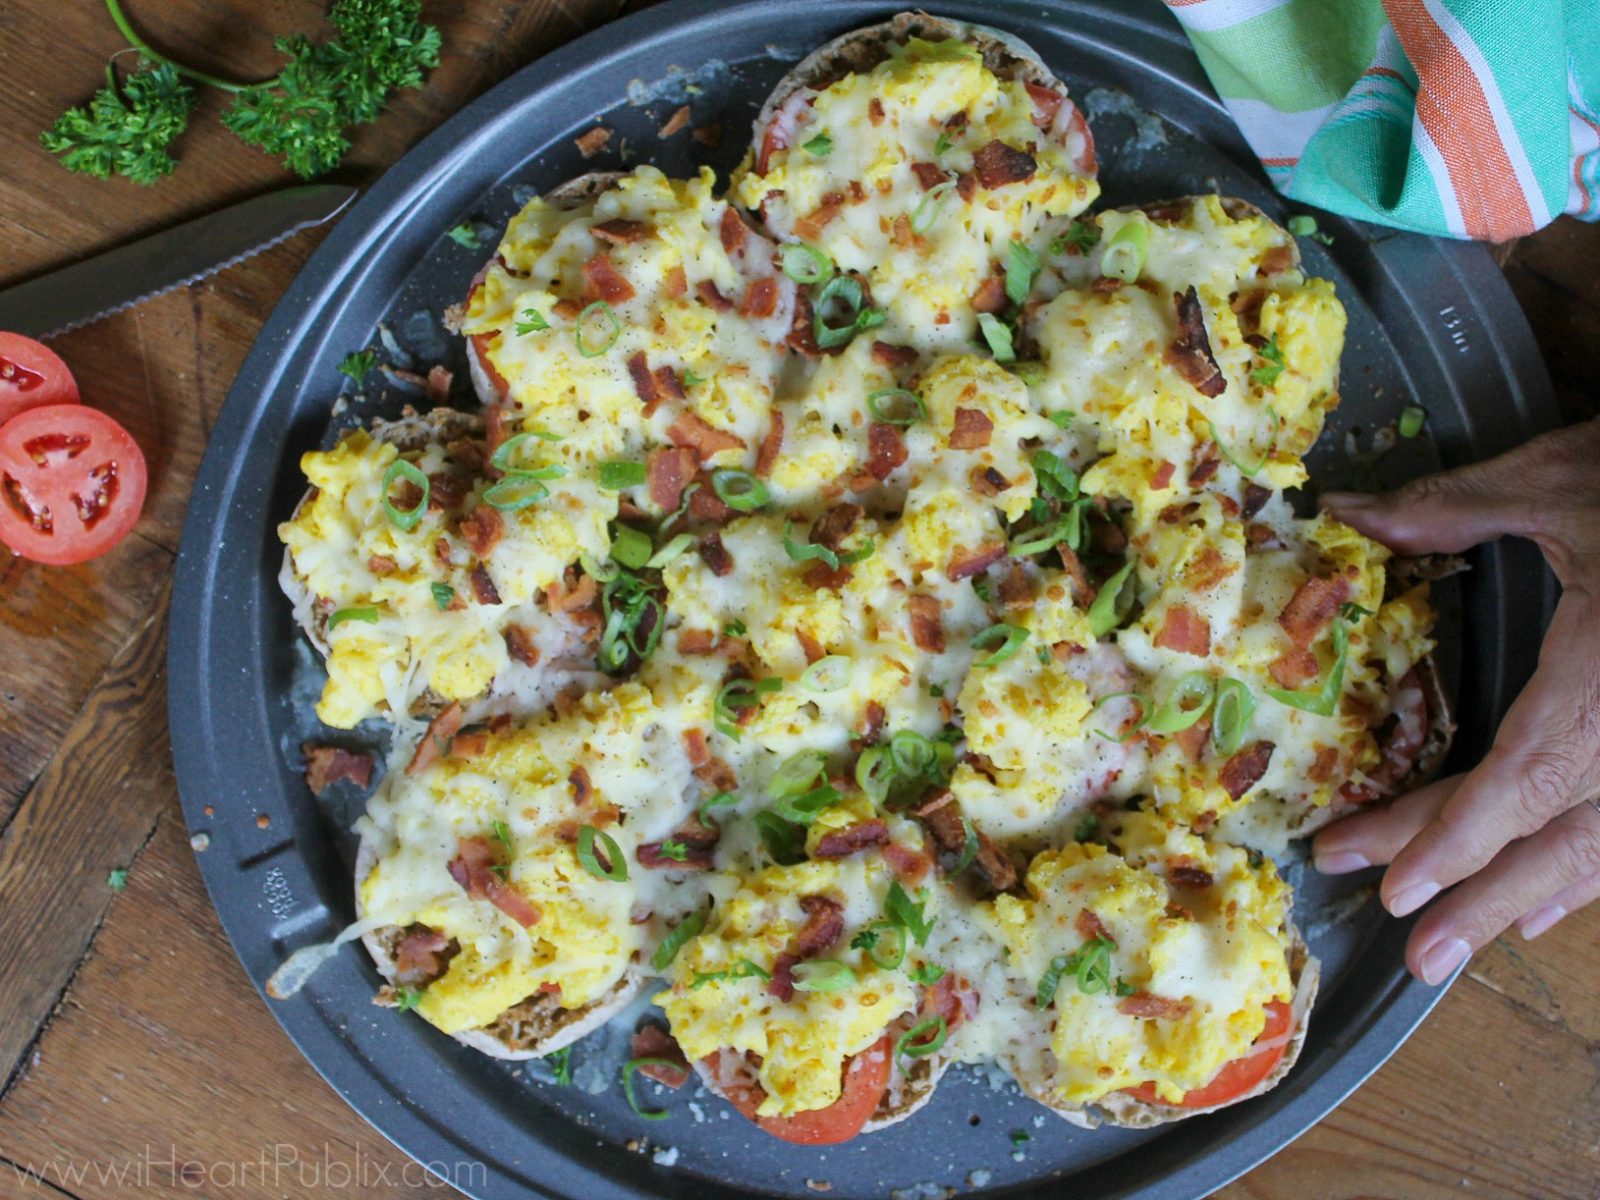 English Muffin Breakfast Pizza Pull Apart – Super Meal To Go With The Sales At Publix